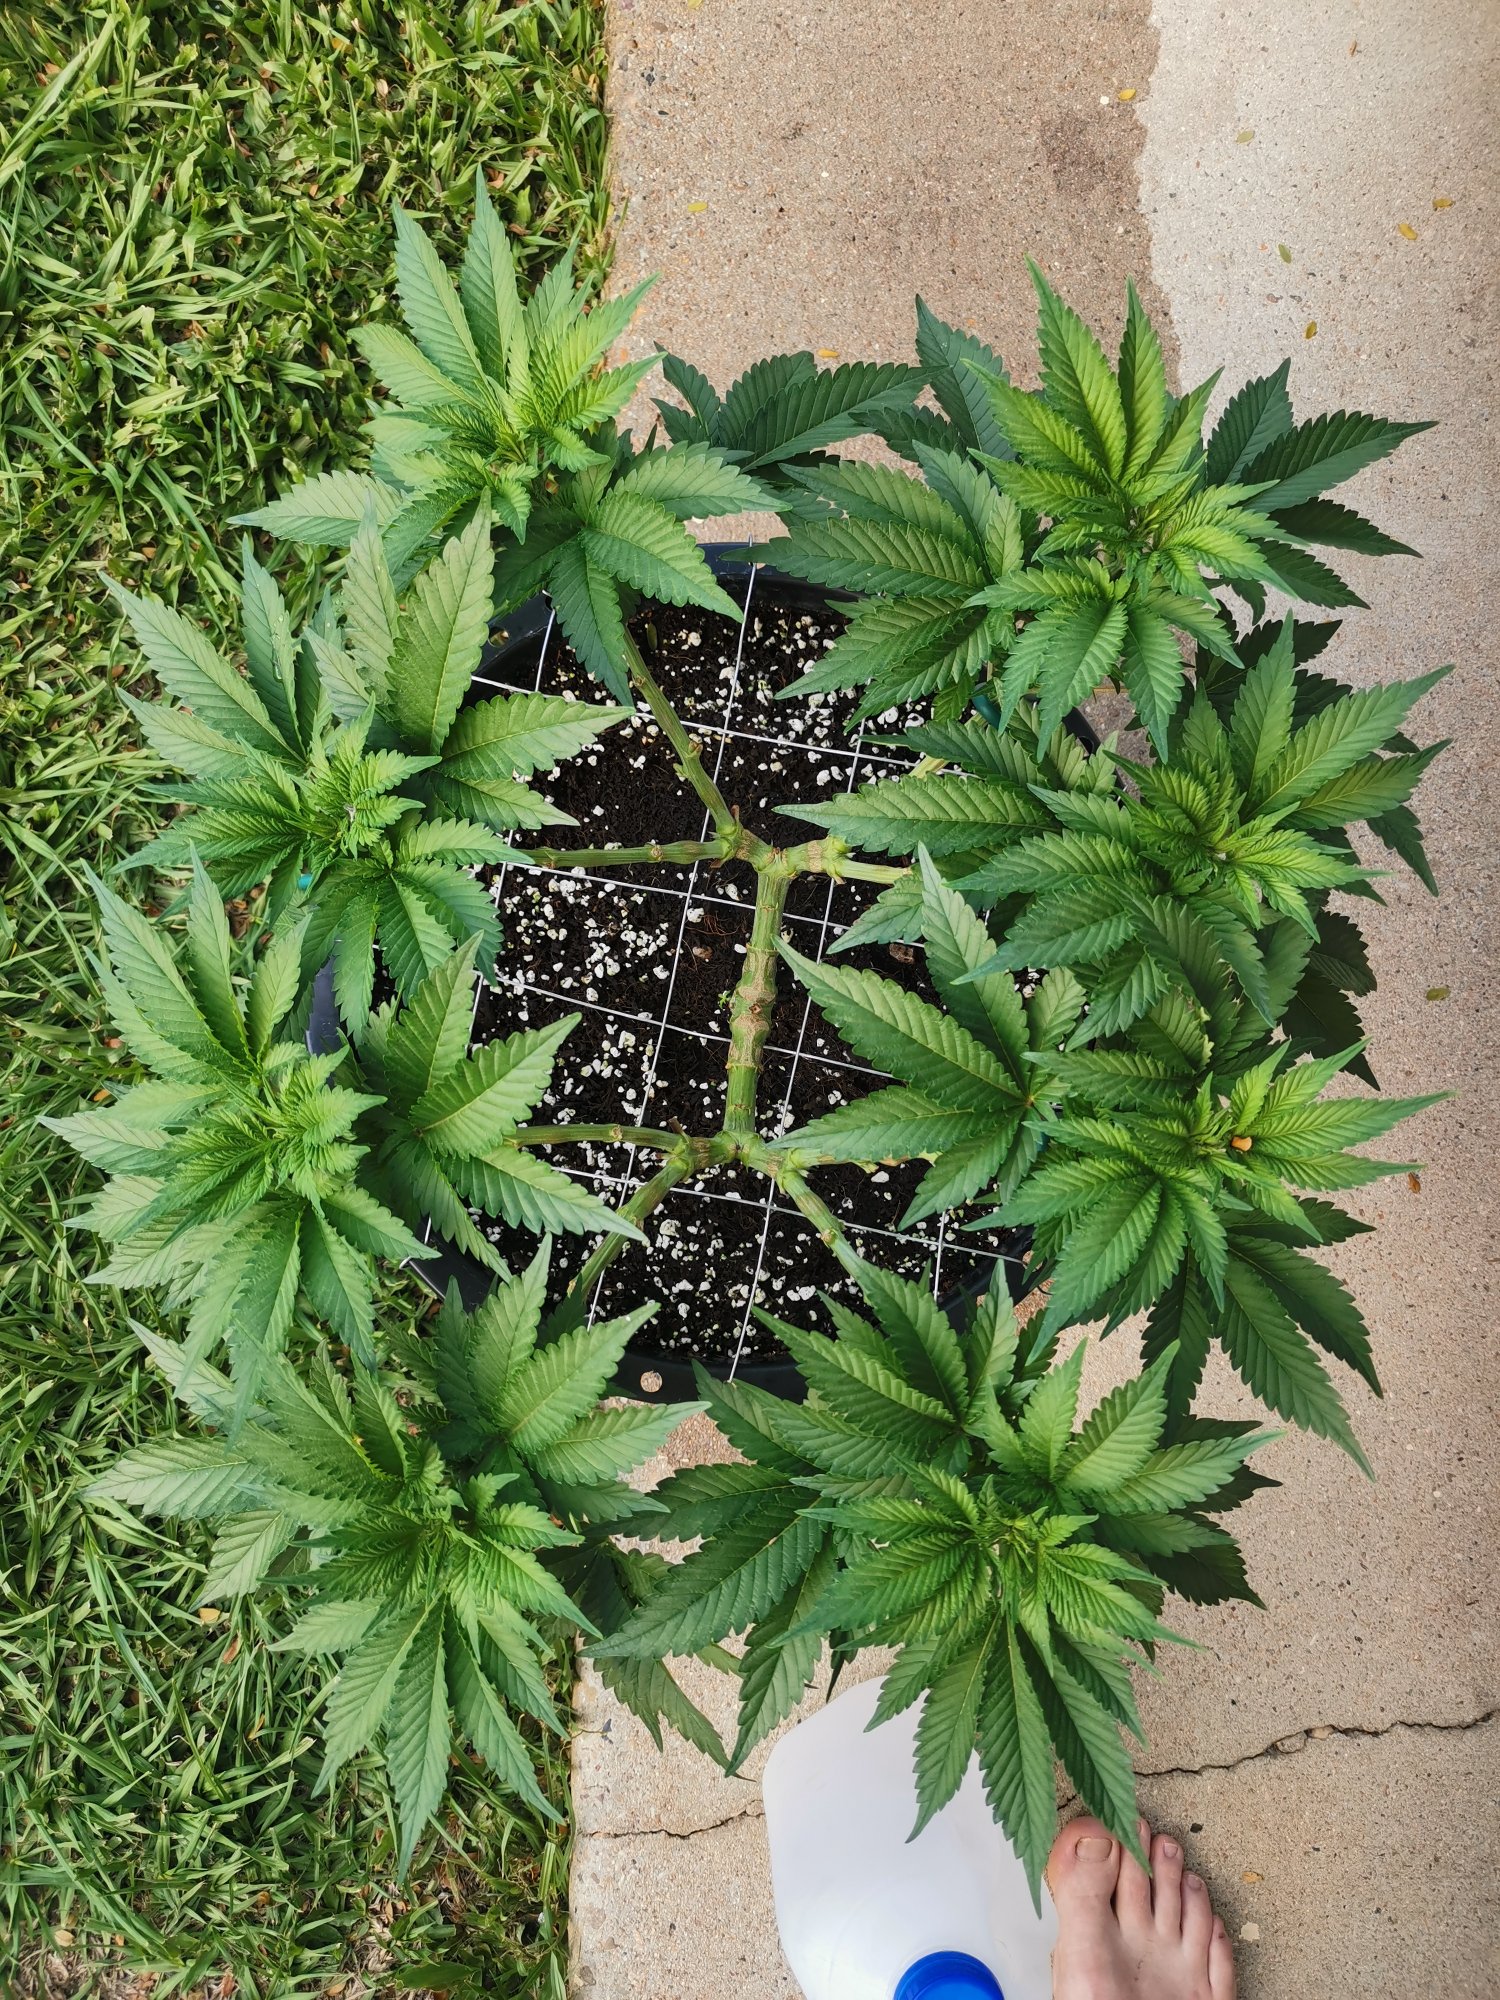 Transitioning plants in coco to outdoors